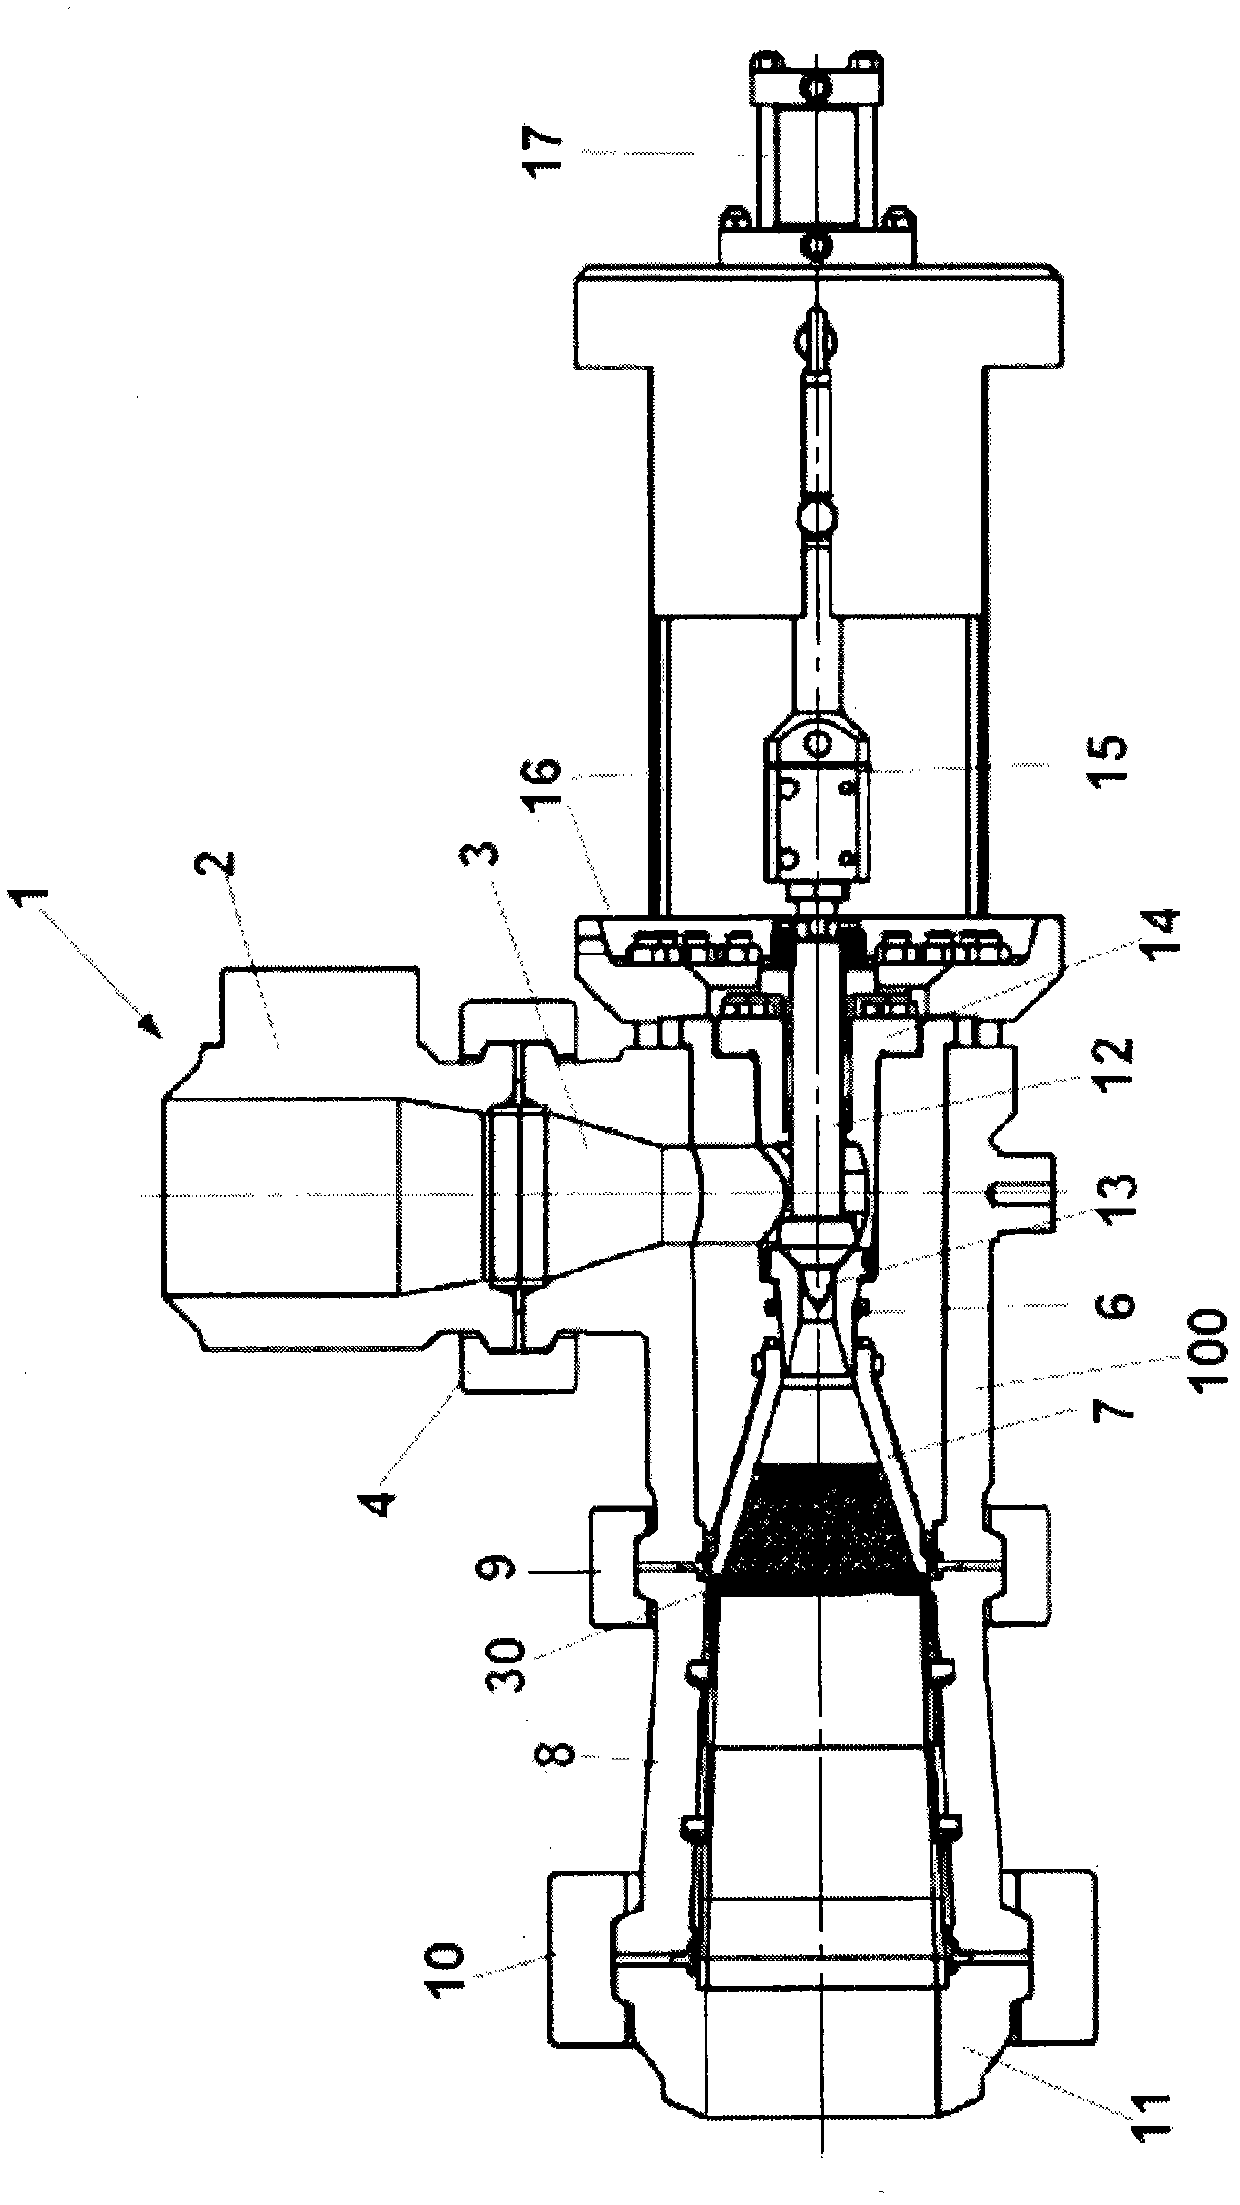 Control valve, in particular angle control valve and double control valve, also in the form of a straight-seat valve and inc.lined-seat valve for extreme control applications